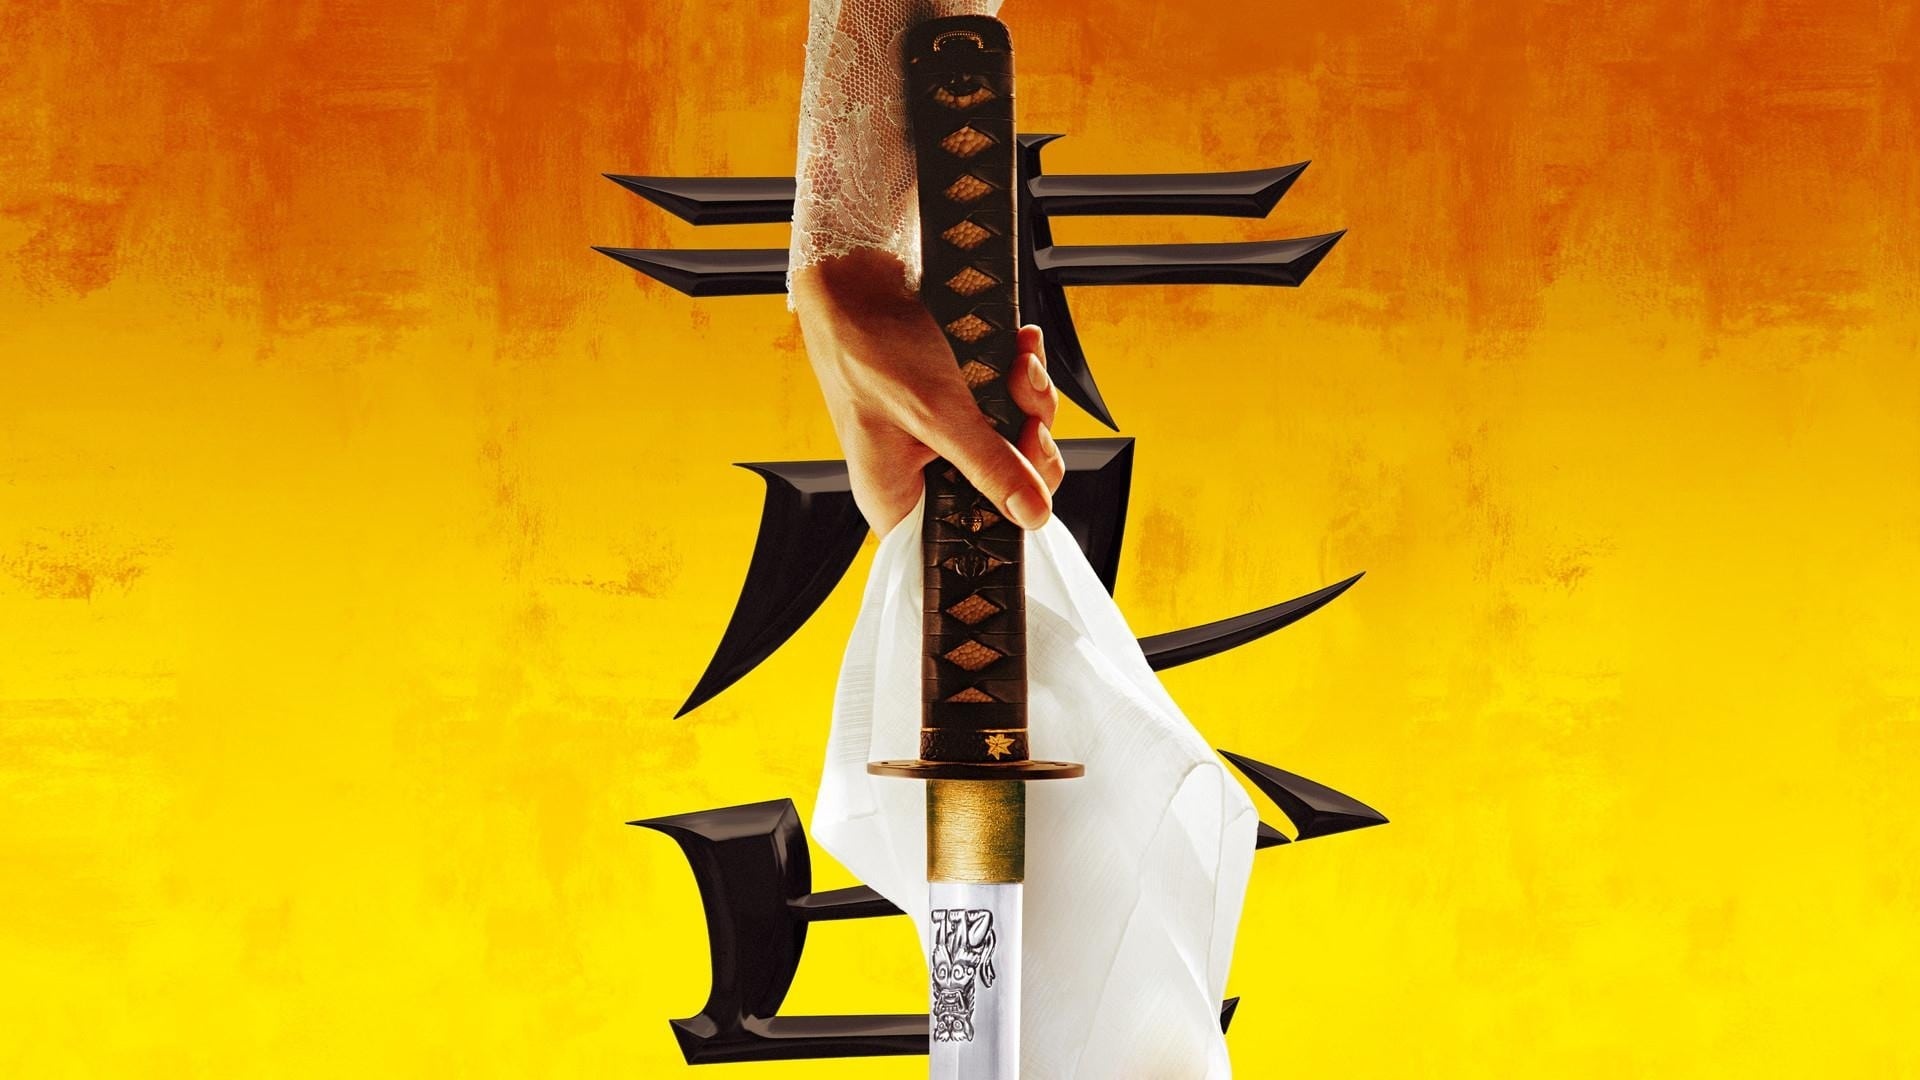 Kill Bill: An action movie inspired by Chinese and Japanese cinema. 1920x1080 Full HD Wallpaper.